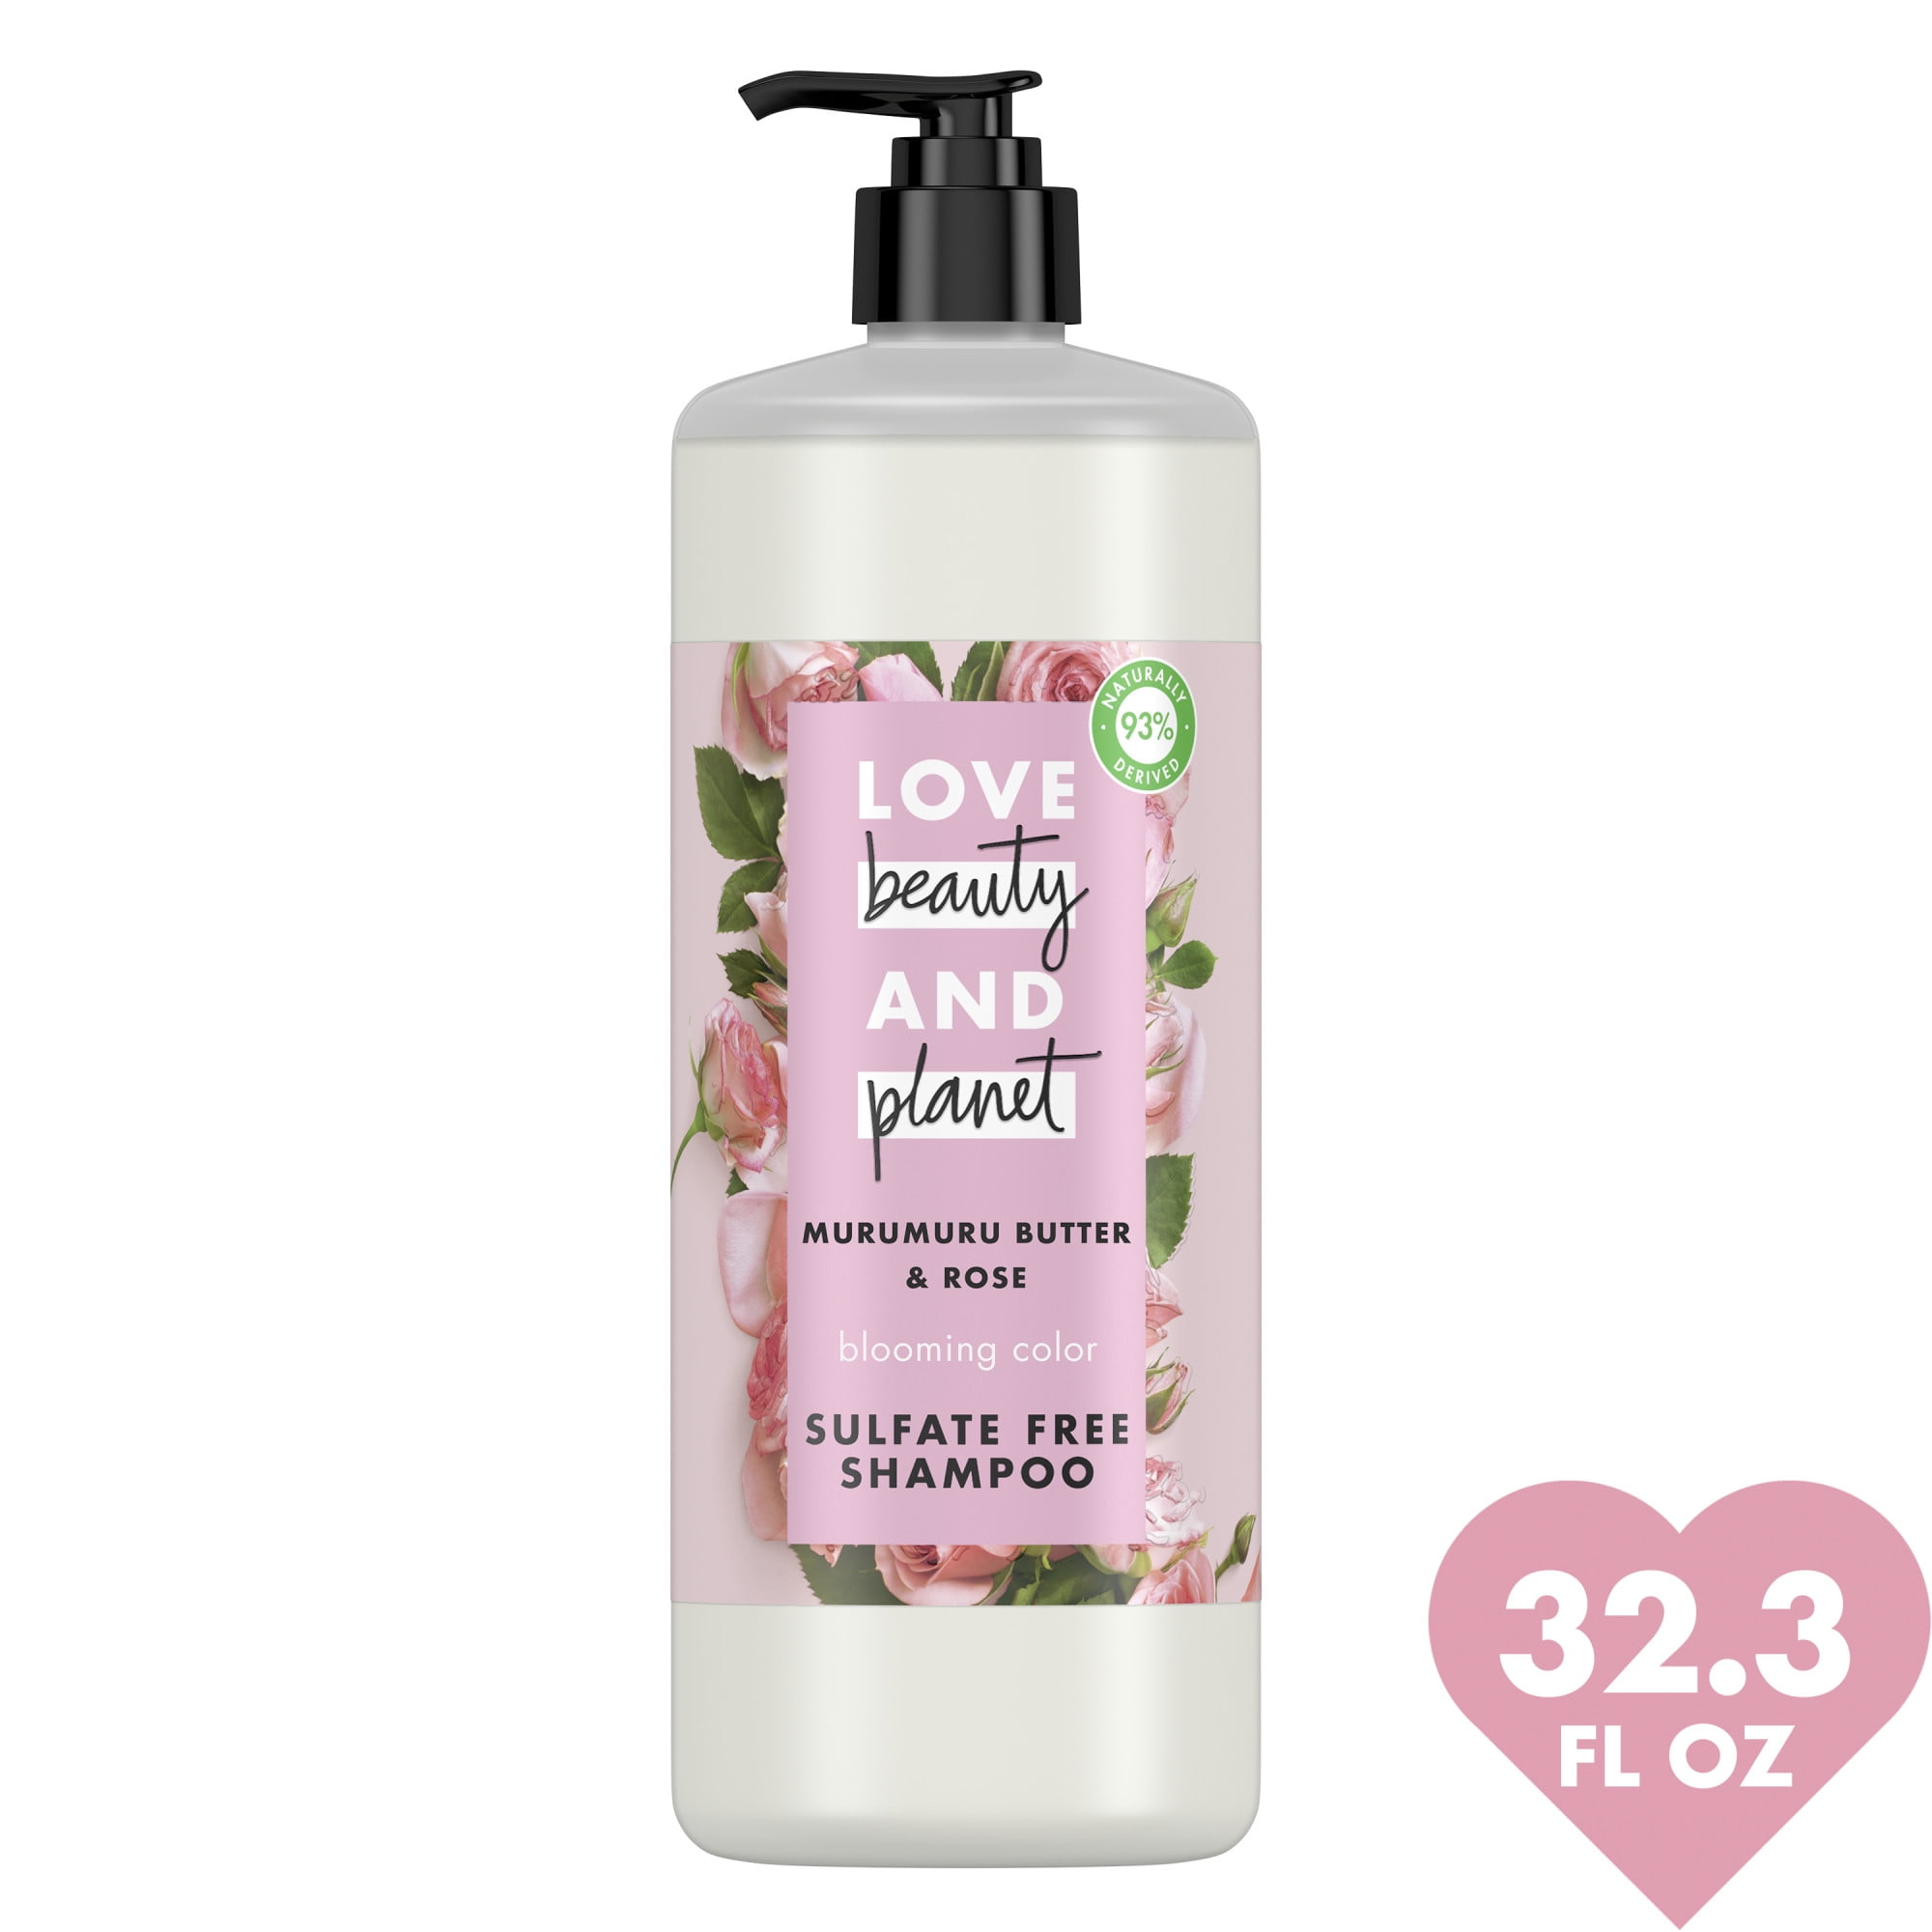 Love Beauty And Planet Blooming Murumuru Butter and Rose, Sulfate-Free Shampoo Vegan, Paraben-free, Silicone-free, Cruelty-free for Color Treated Hair 32.3 oz - Walmart.com